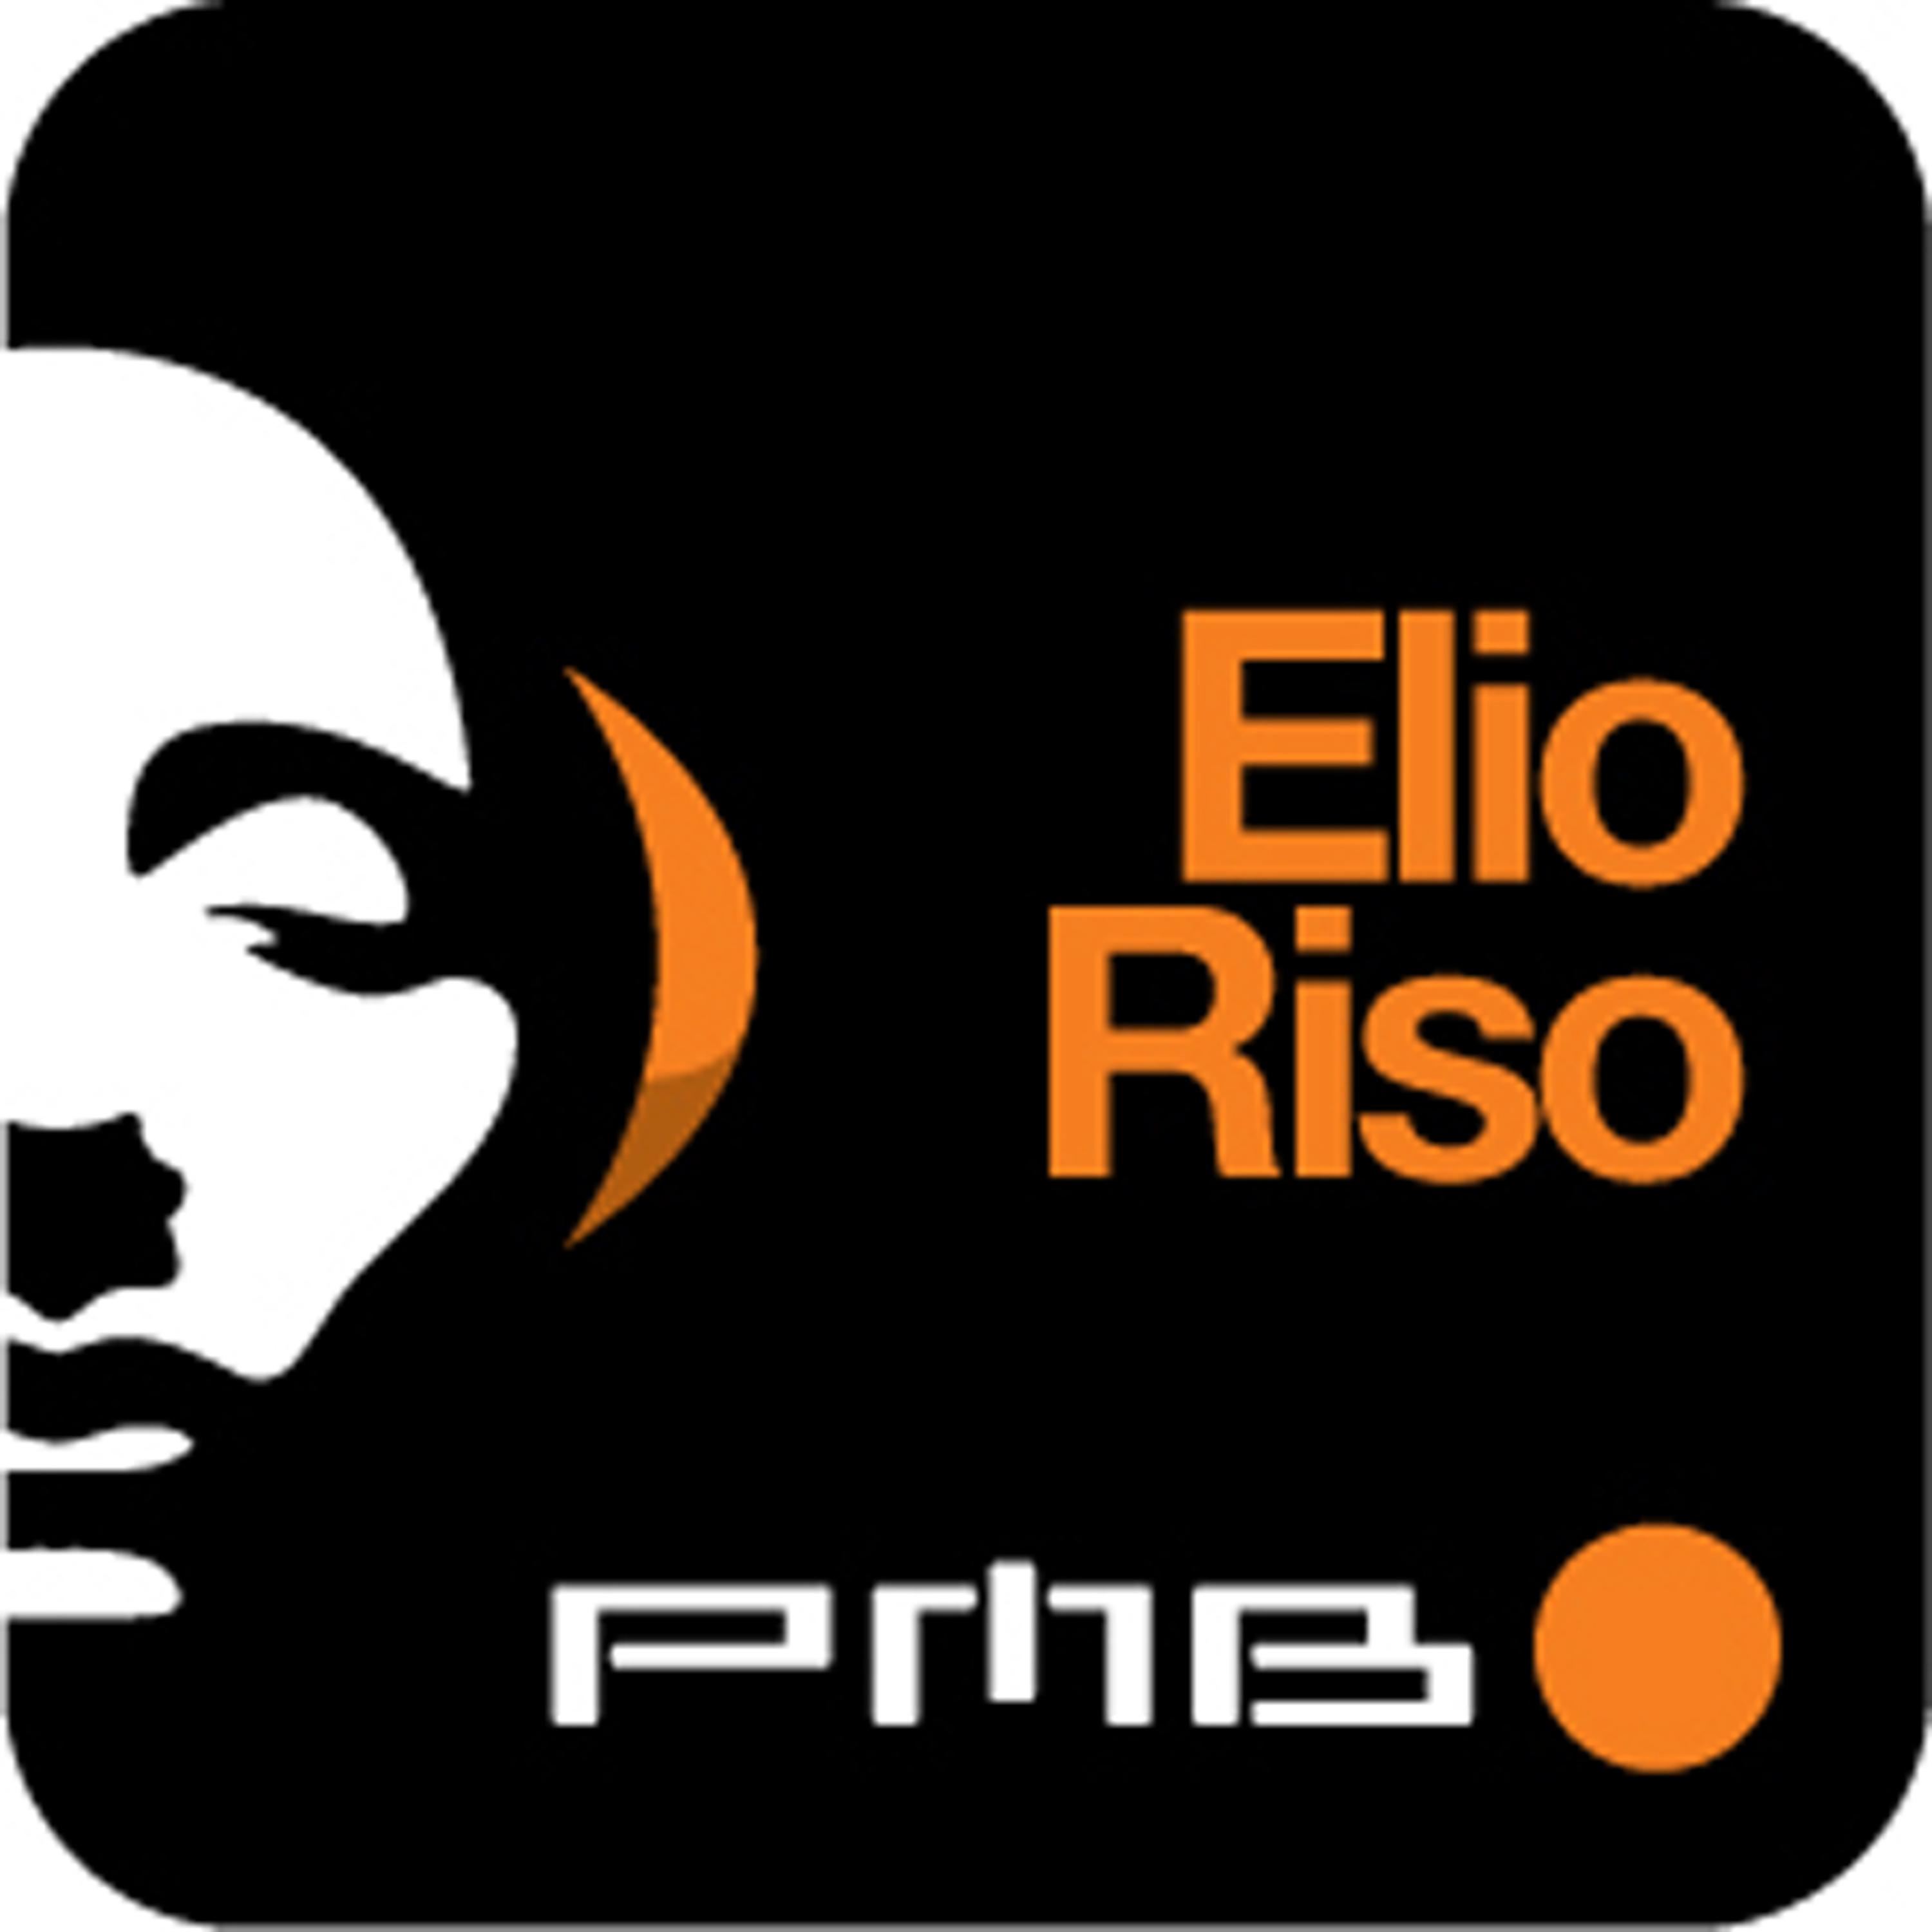 If You Want To (Elio Riso and Audioclash Mix)